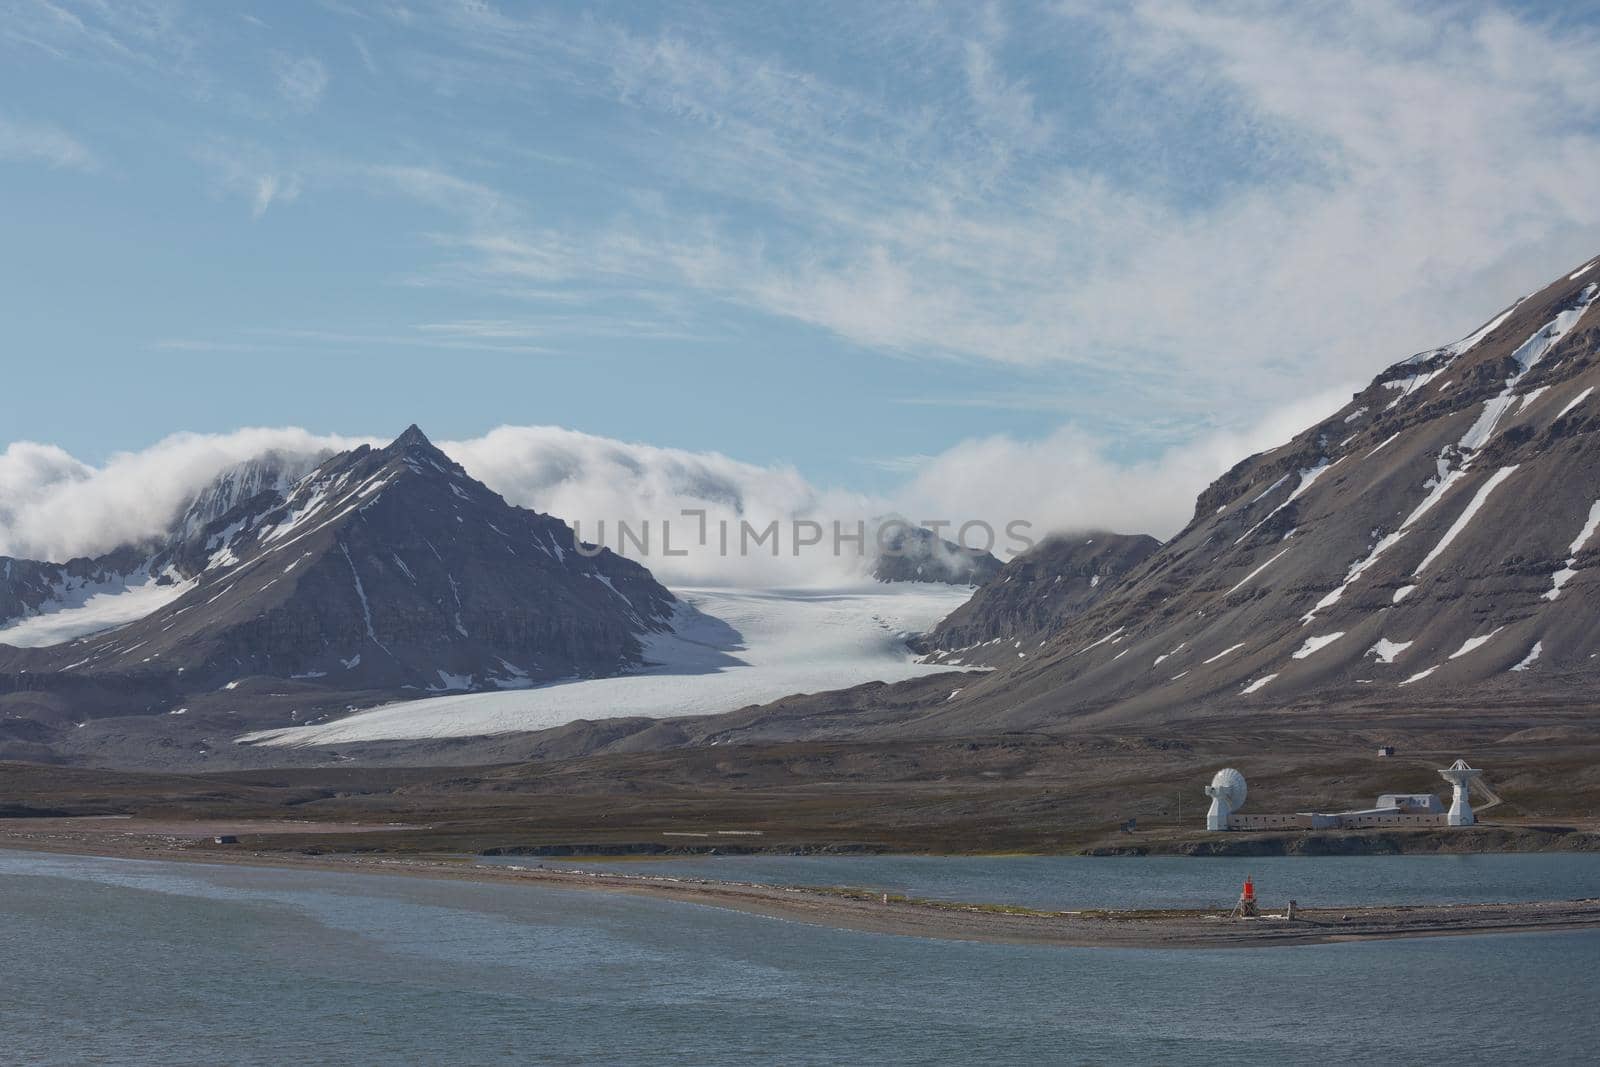 Mountains, glaciers and coastline landscape close to a village called "Ny-Ålesund" located at 79 degree North on Spitsbergen by wondry